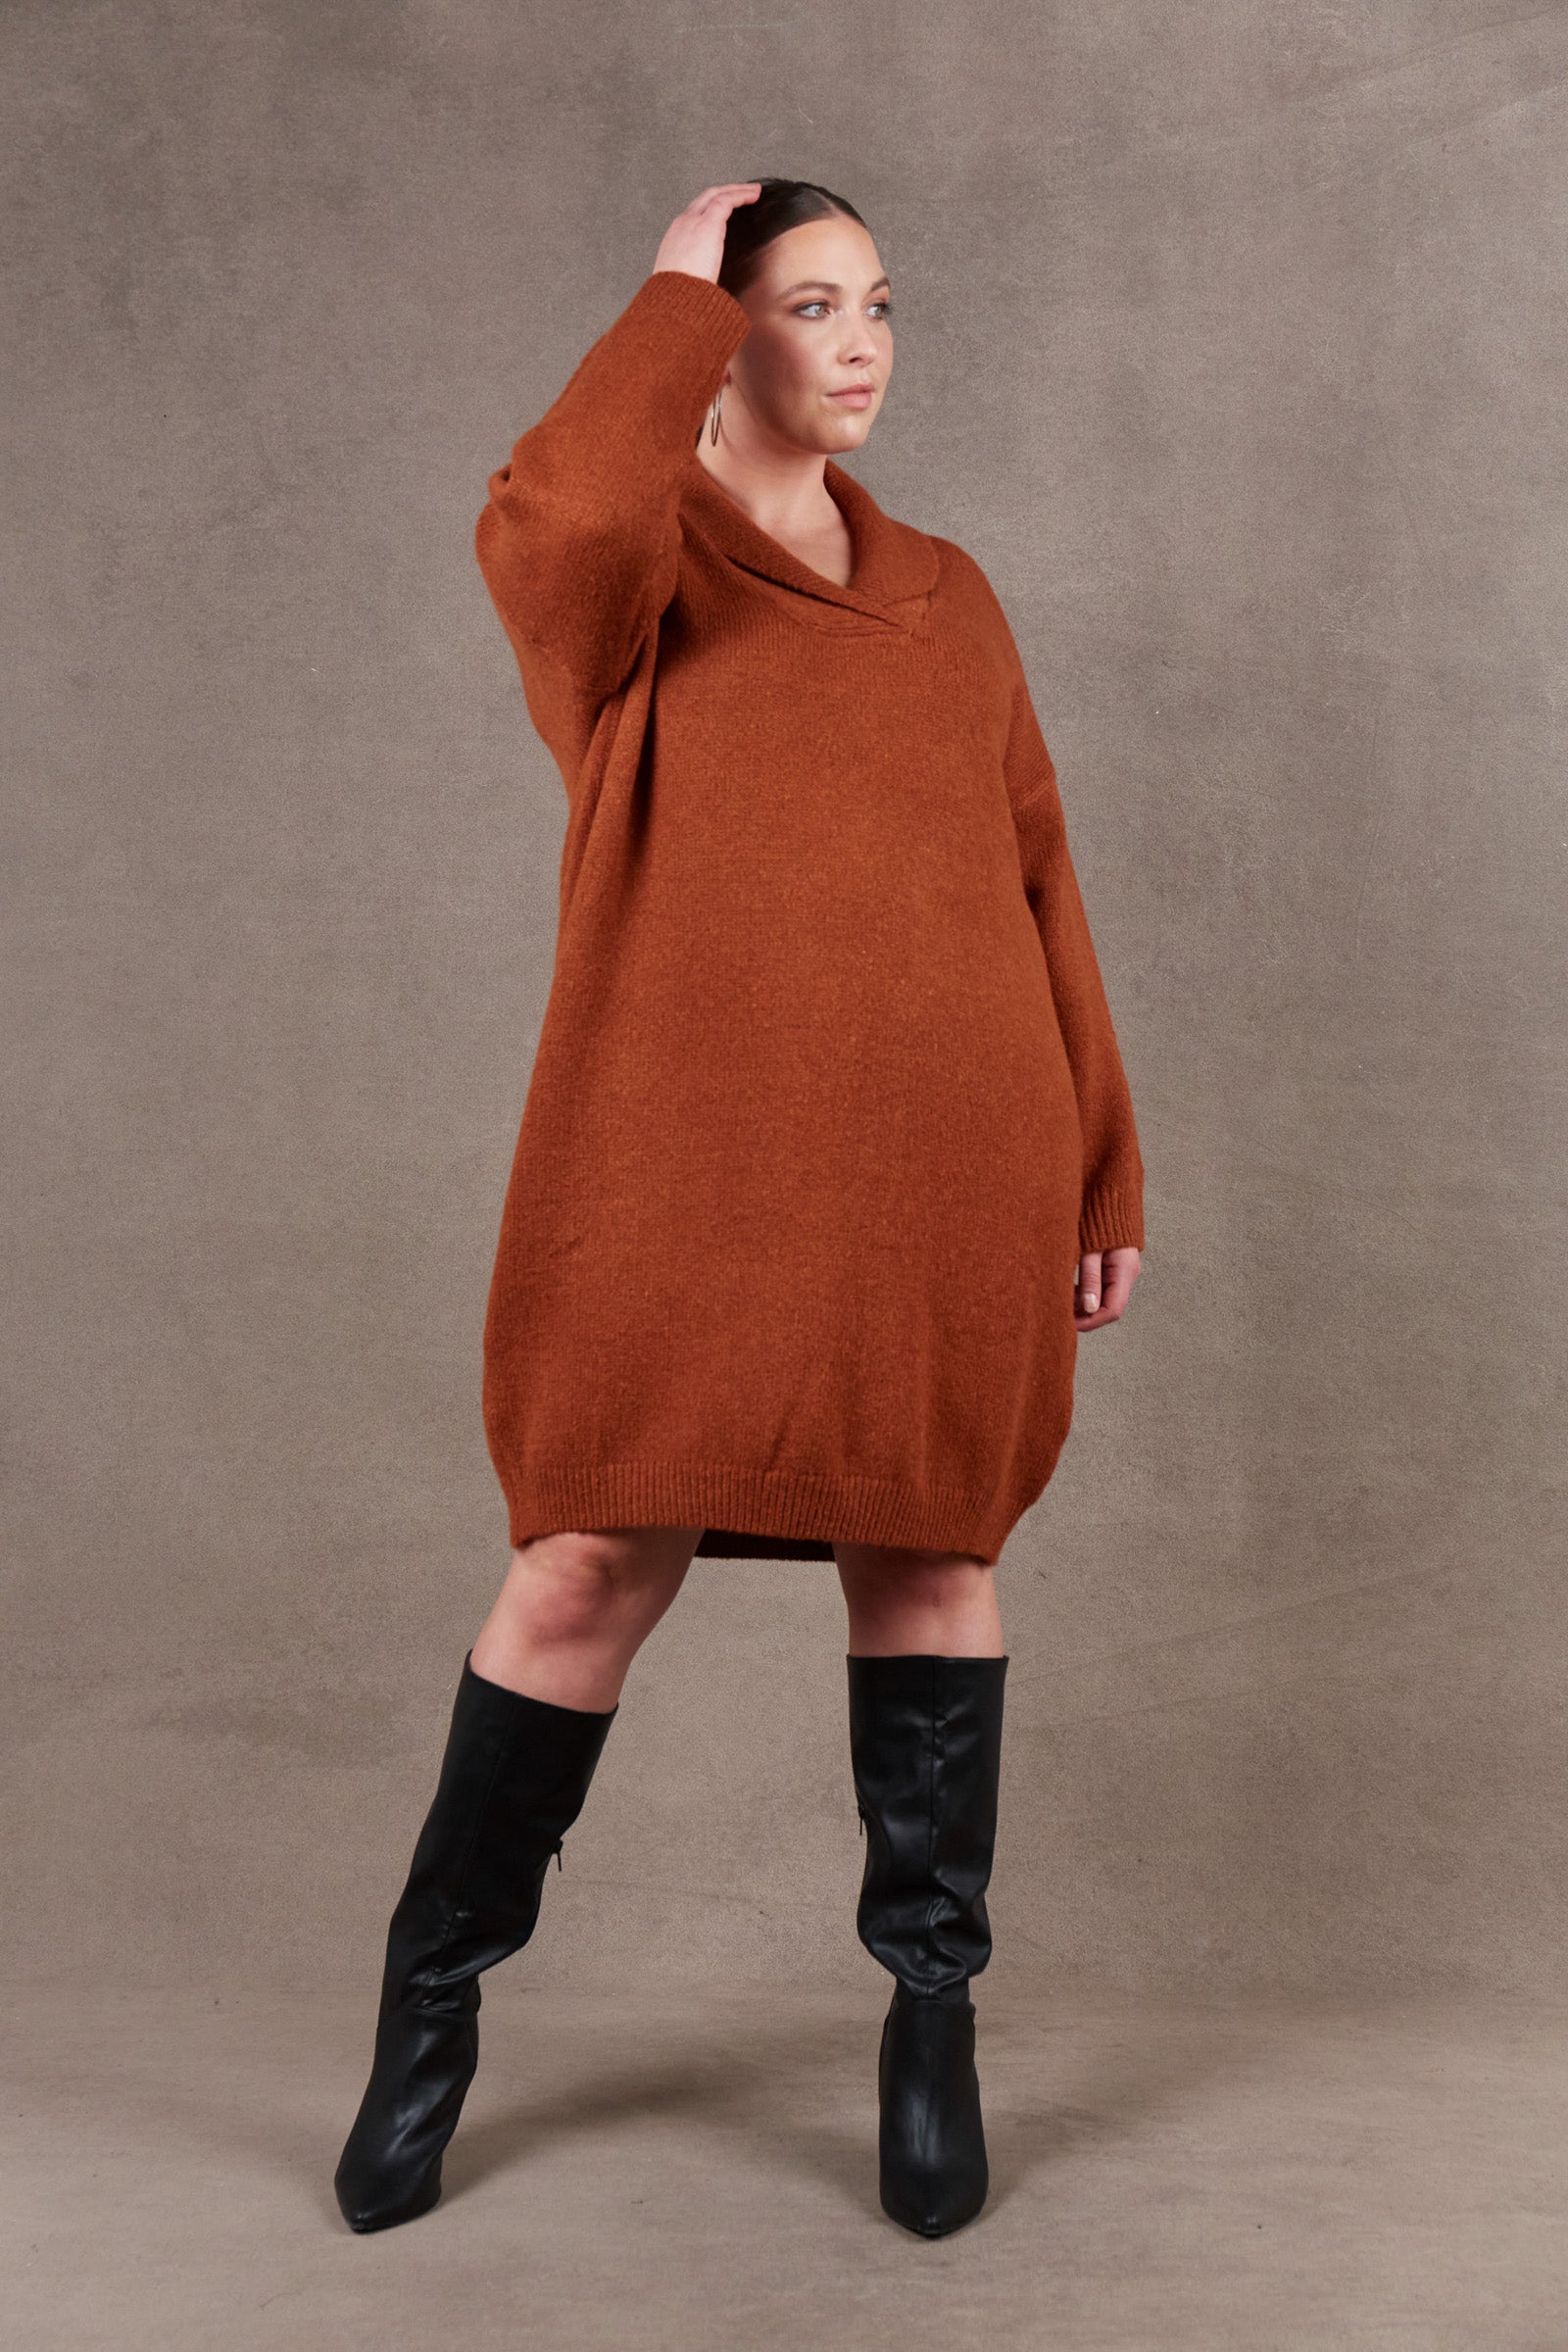 Paarl Top/Dress - Ochre - eb&ive Clothing - Knit Jumper One Size